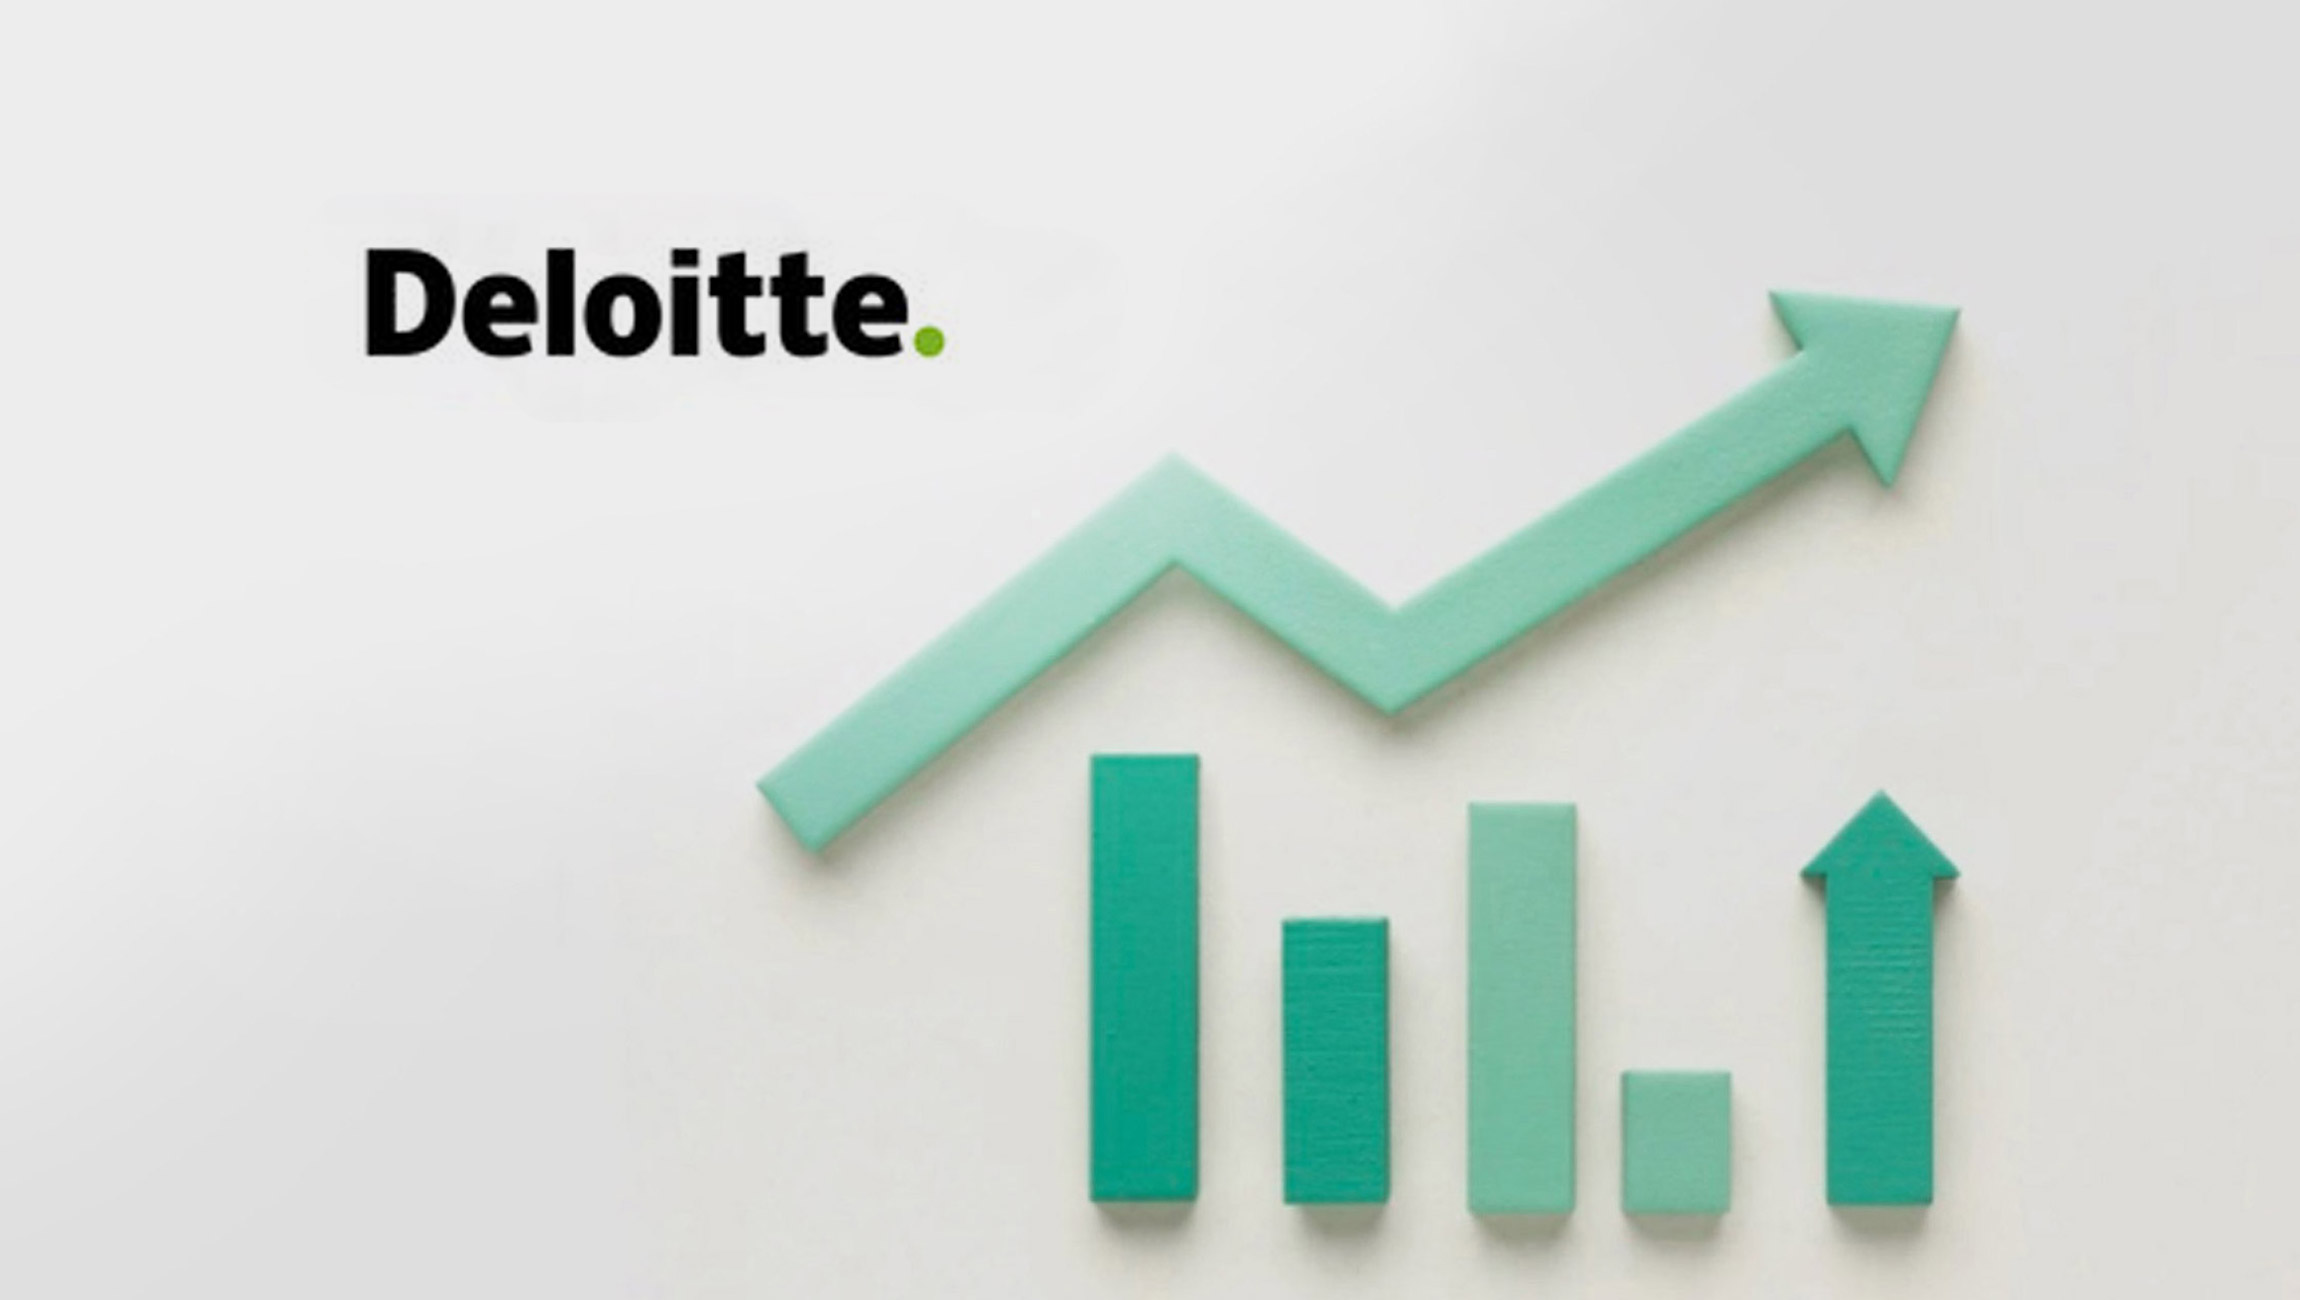 Deloitte Holiday Retail Sales Expected to Increase 4 to 6